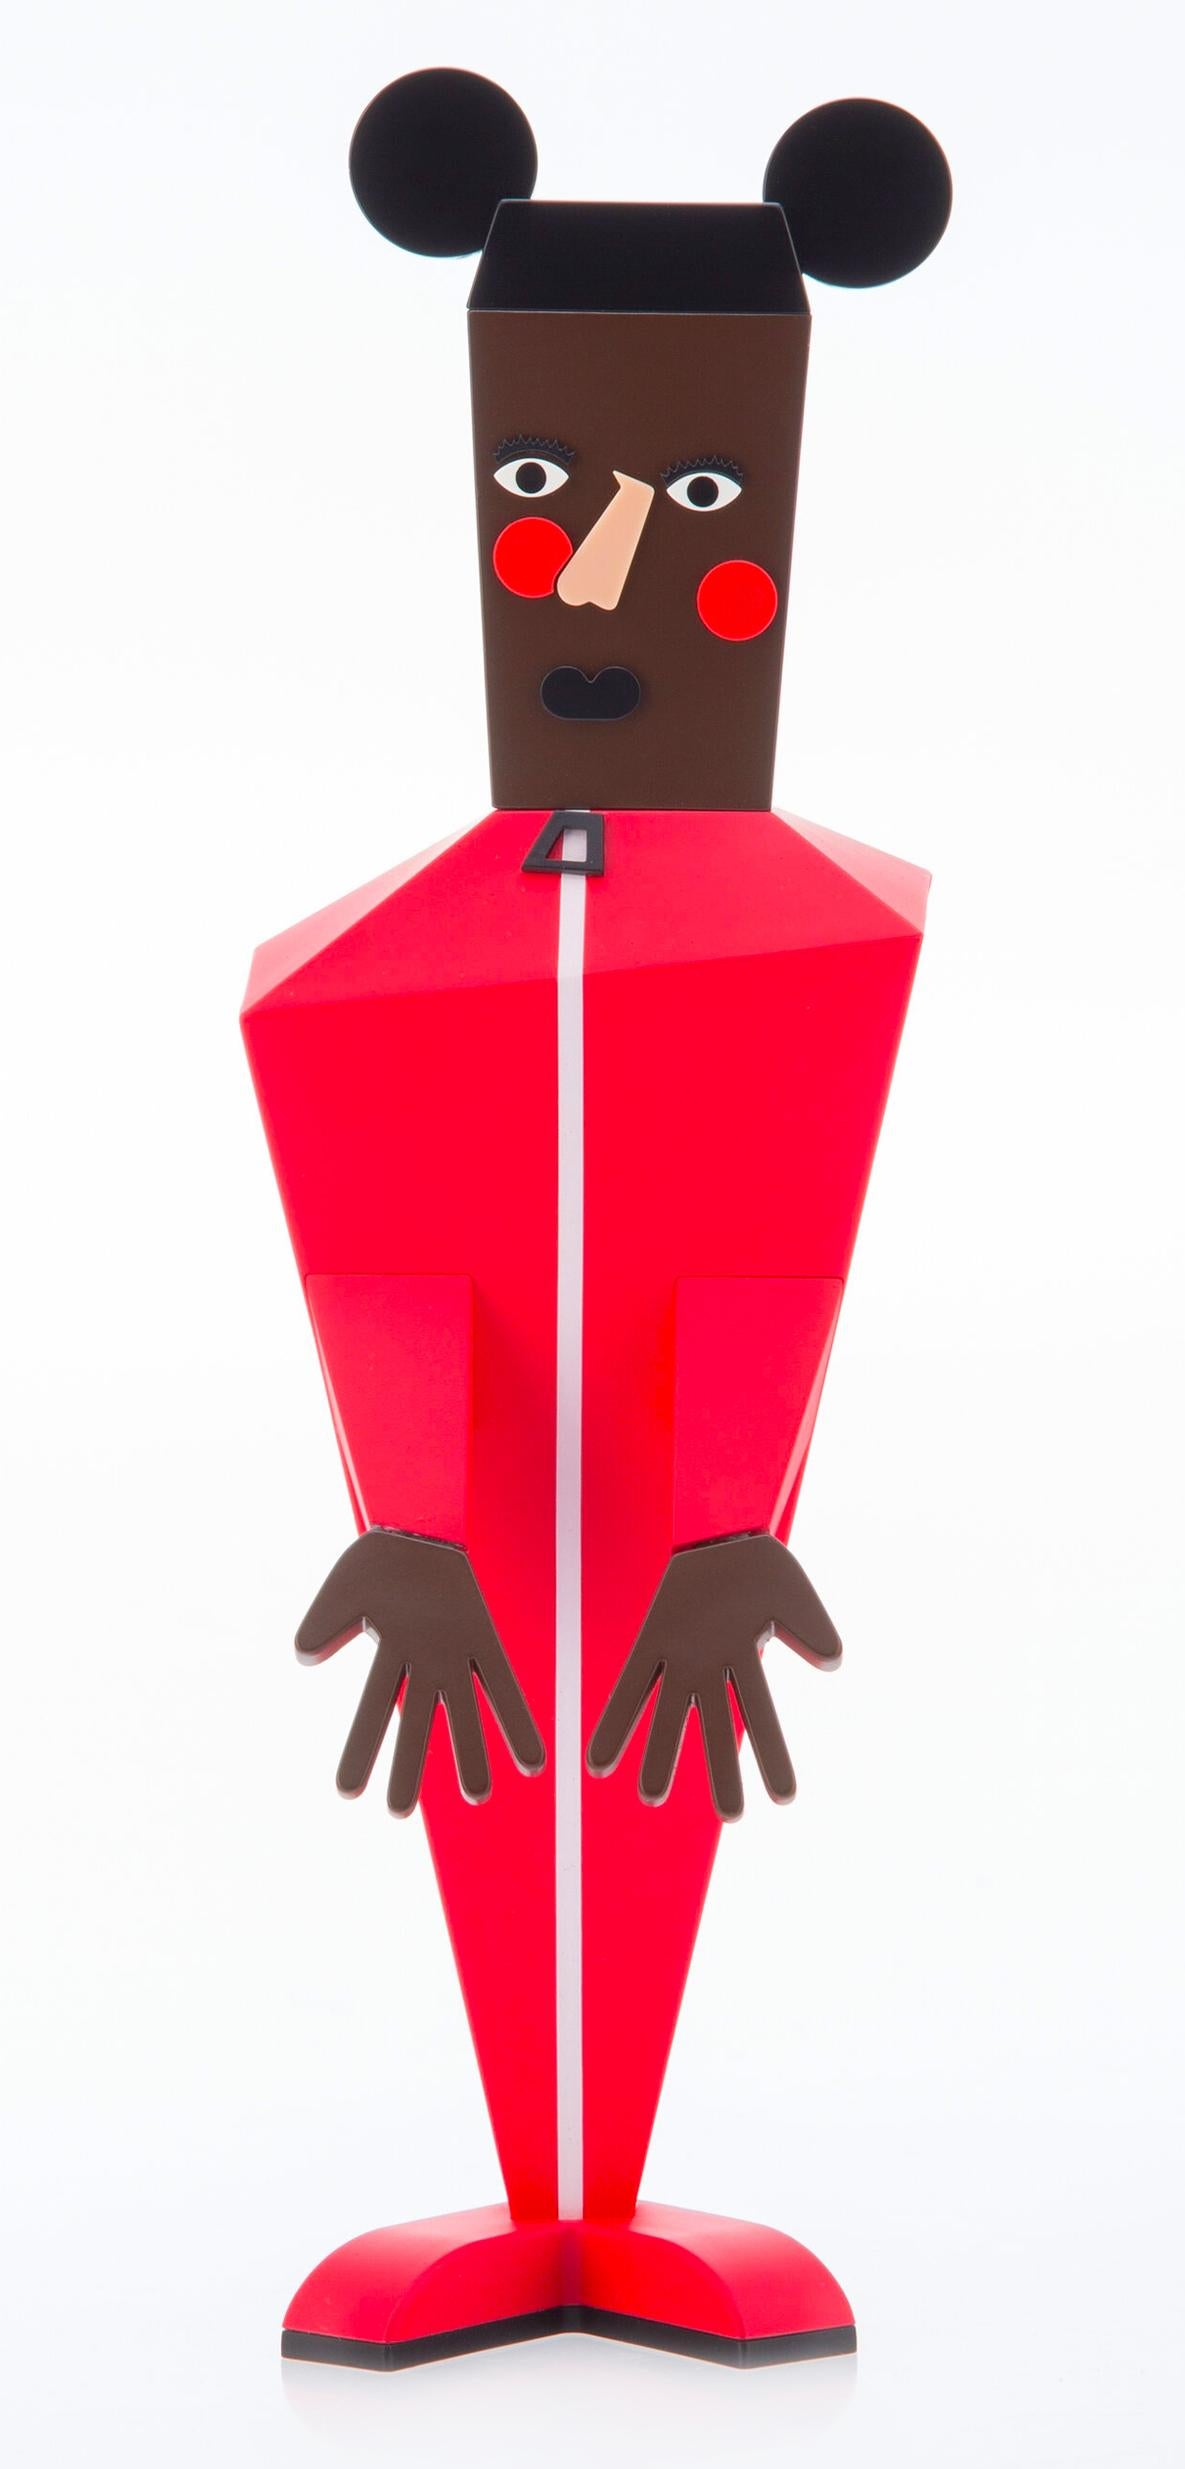 Nina Chanel Abney Baby: 
Nina Chanel’s 'Baby' figure strikingly re-imagines Mickey Mouse as a man dressed in a bright red jumpsuit, with mirroring red circles stamped on the cheeks. Constructed with sharp angles and an asymmetrical mold, the figure